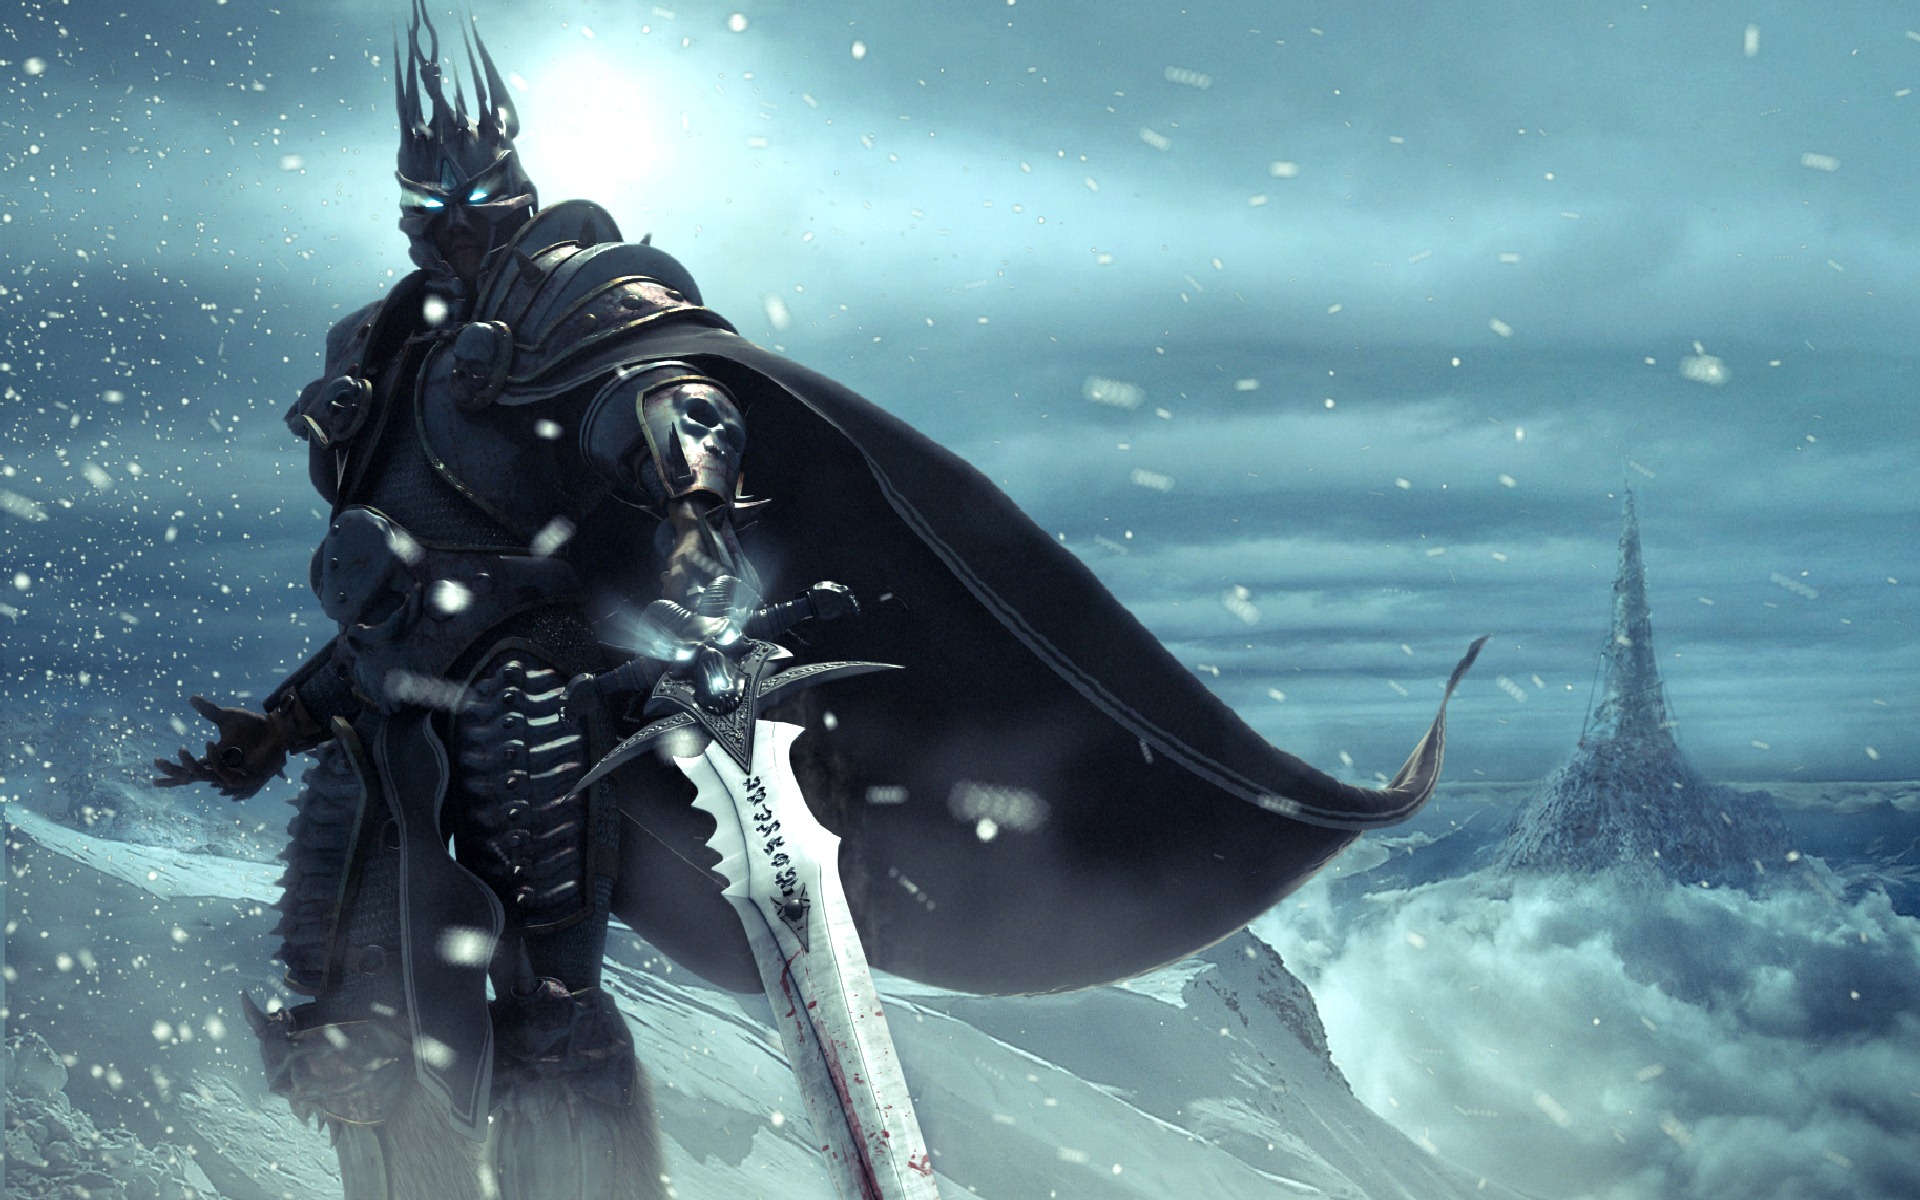  Of Warcraft Wallpaper Death Knight World of warcraft frost knight